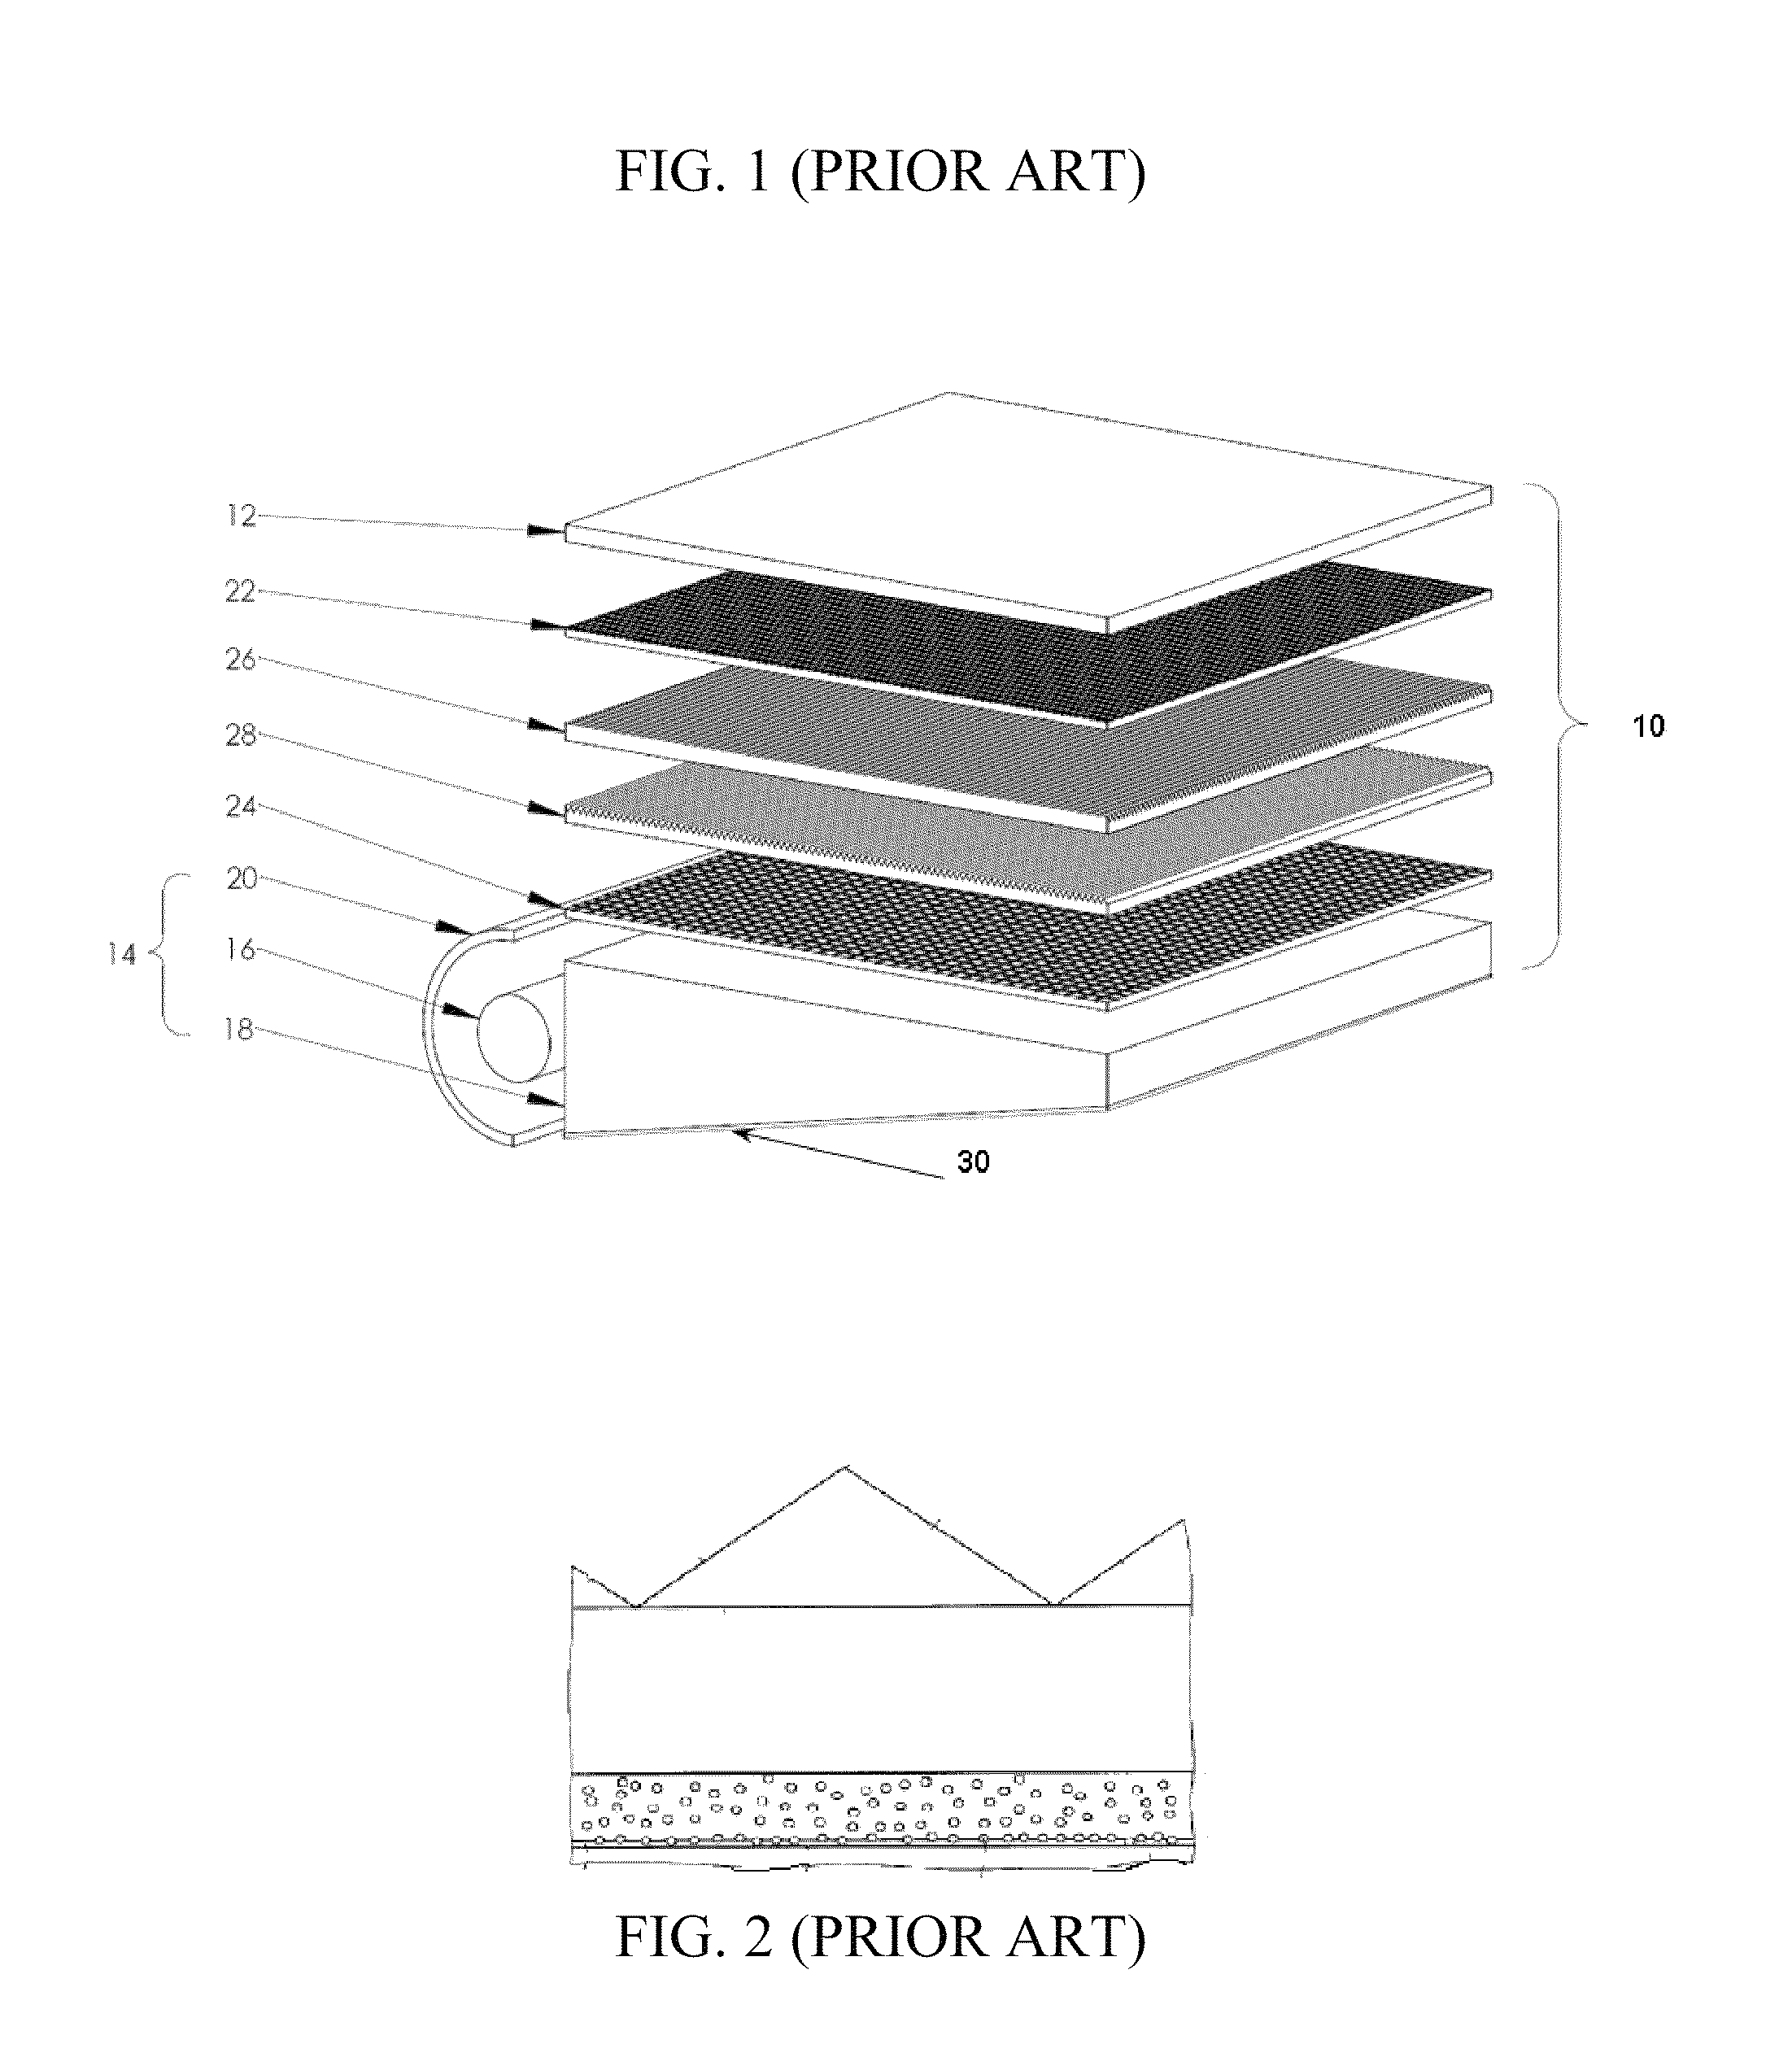 Optical substrates having light collimating and diffusion structures